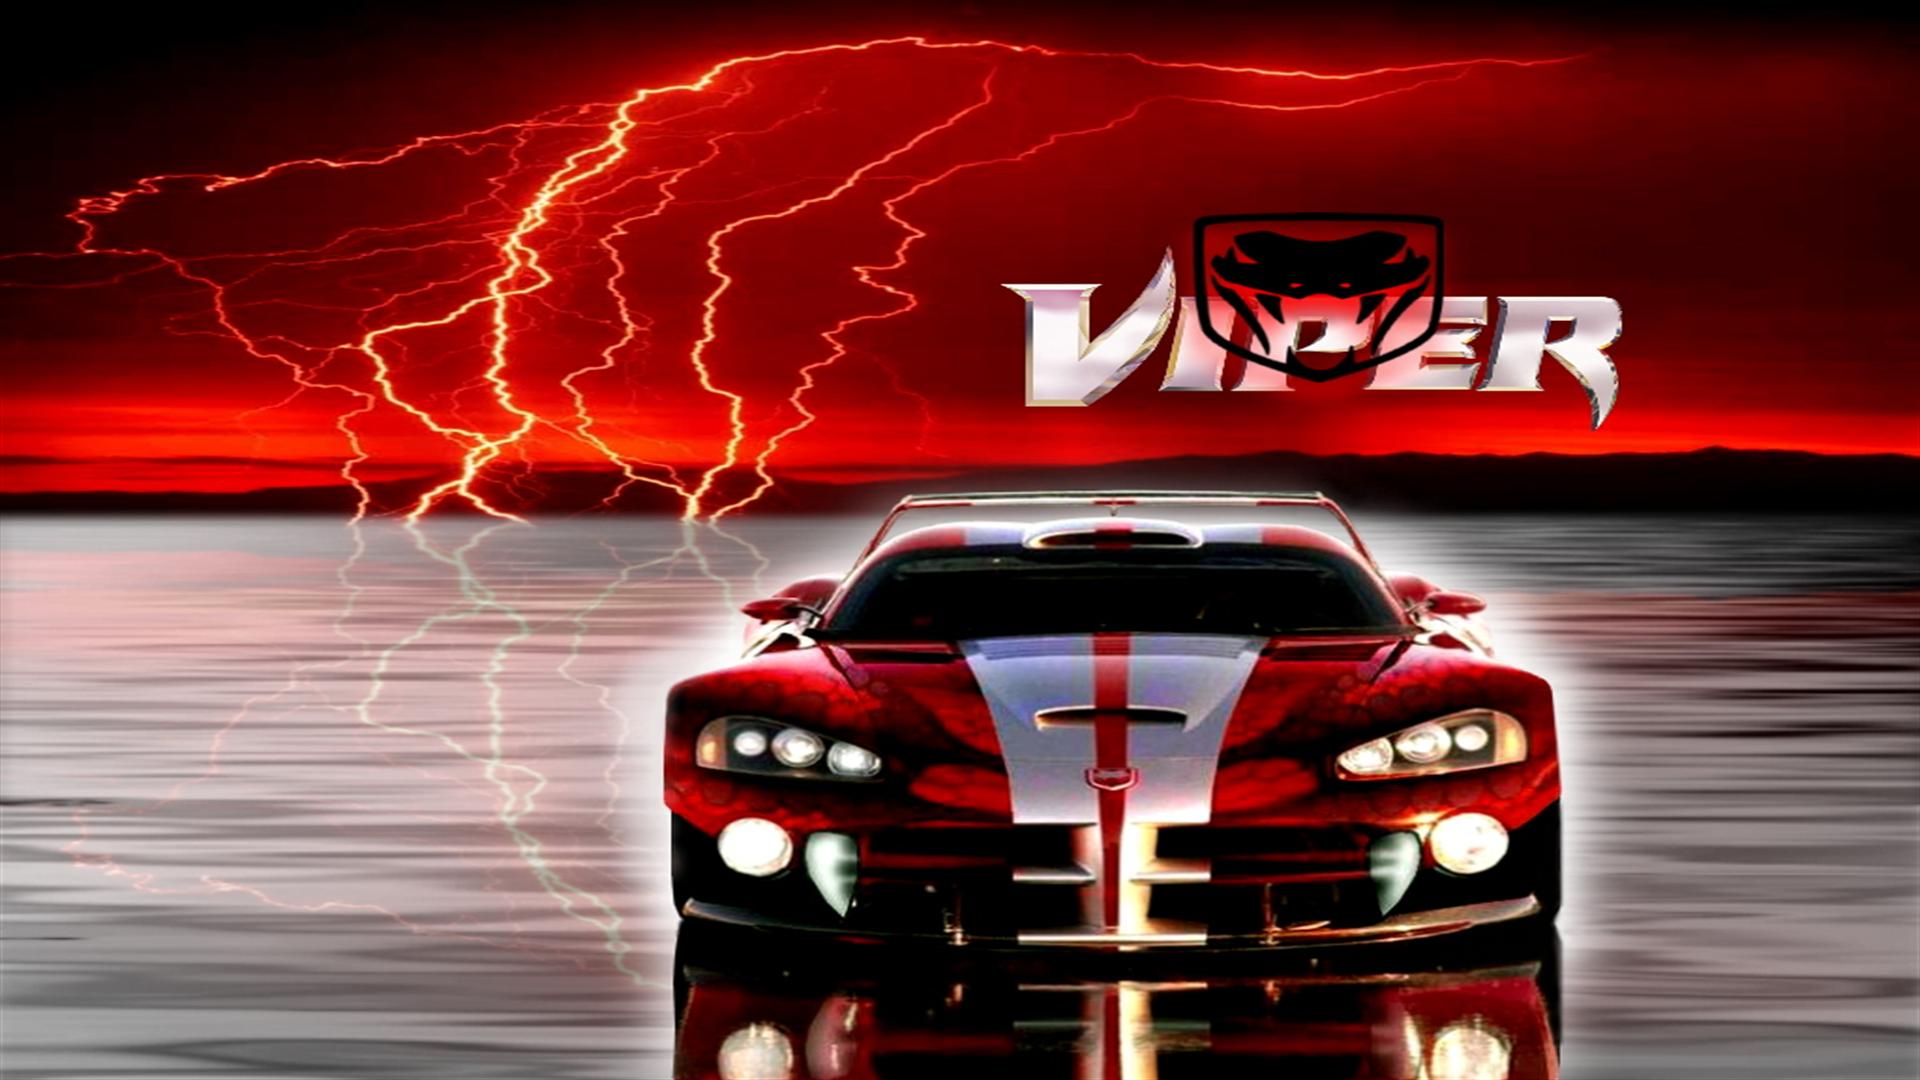 Dodge Viper High Quality And Resolution Wallpaper 1080p HD